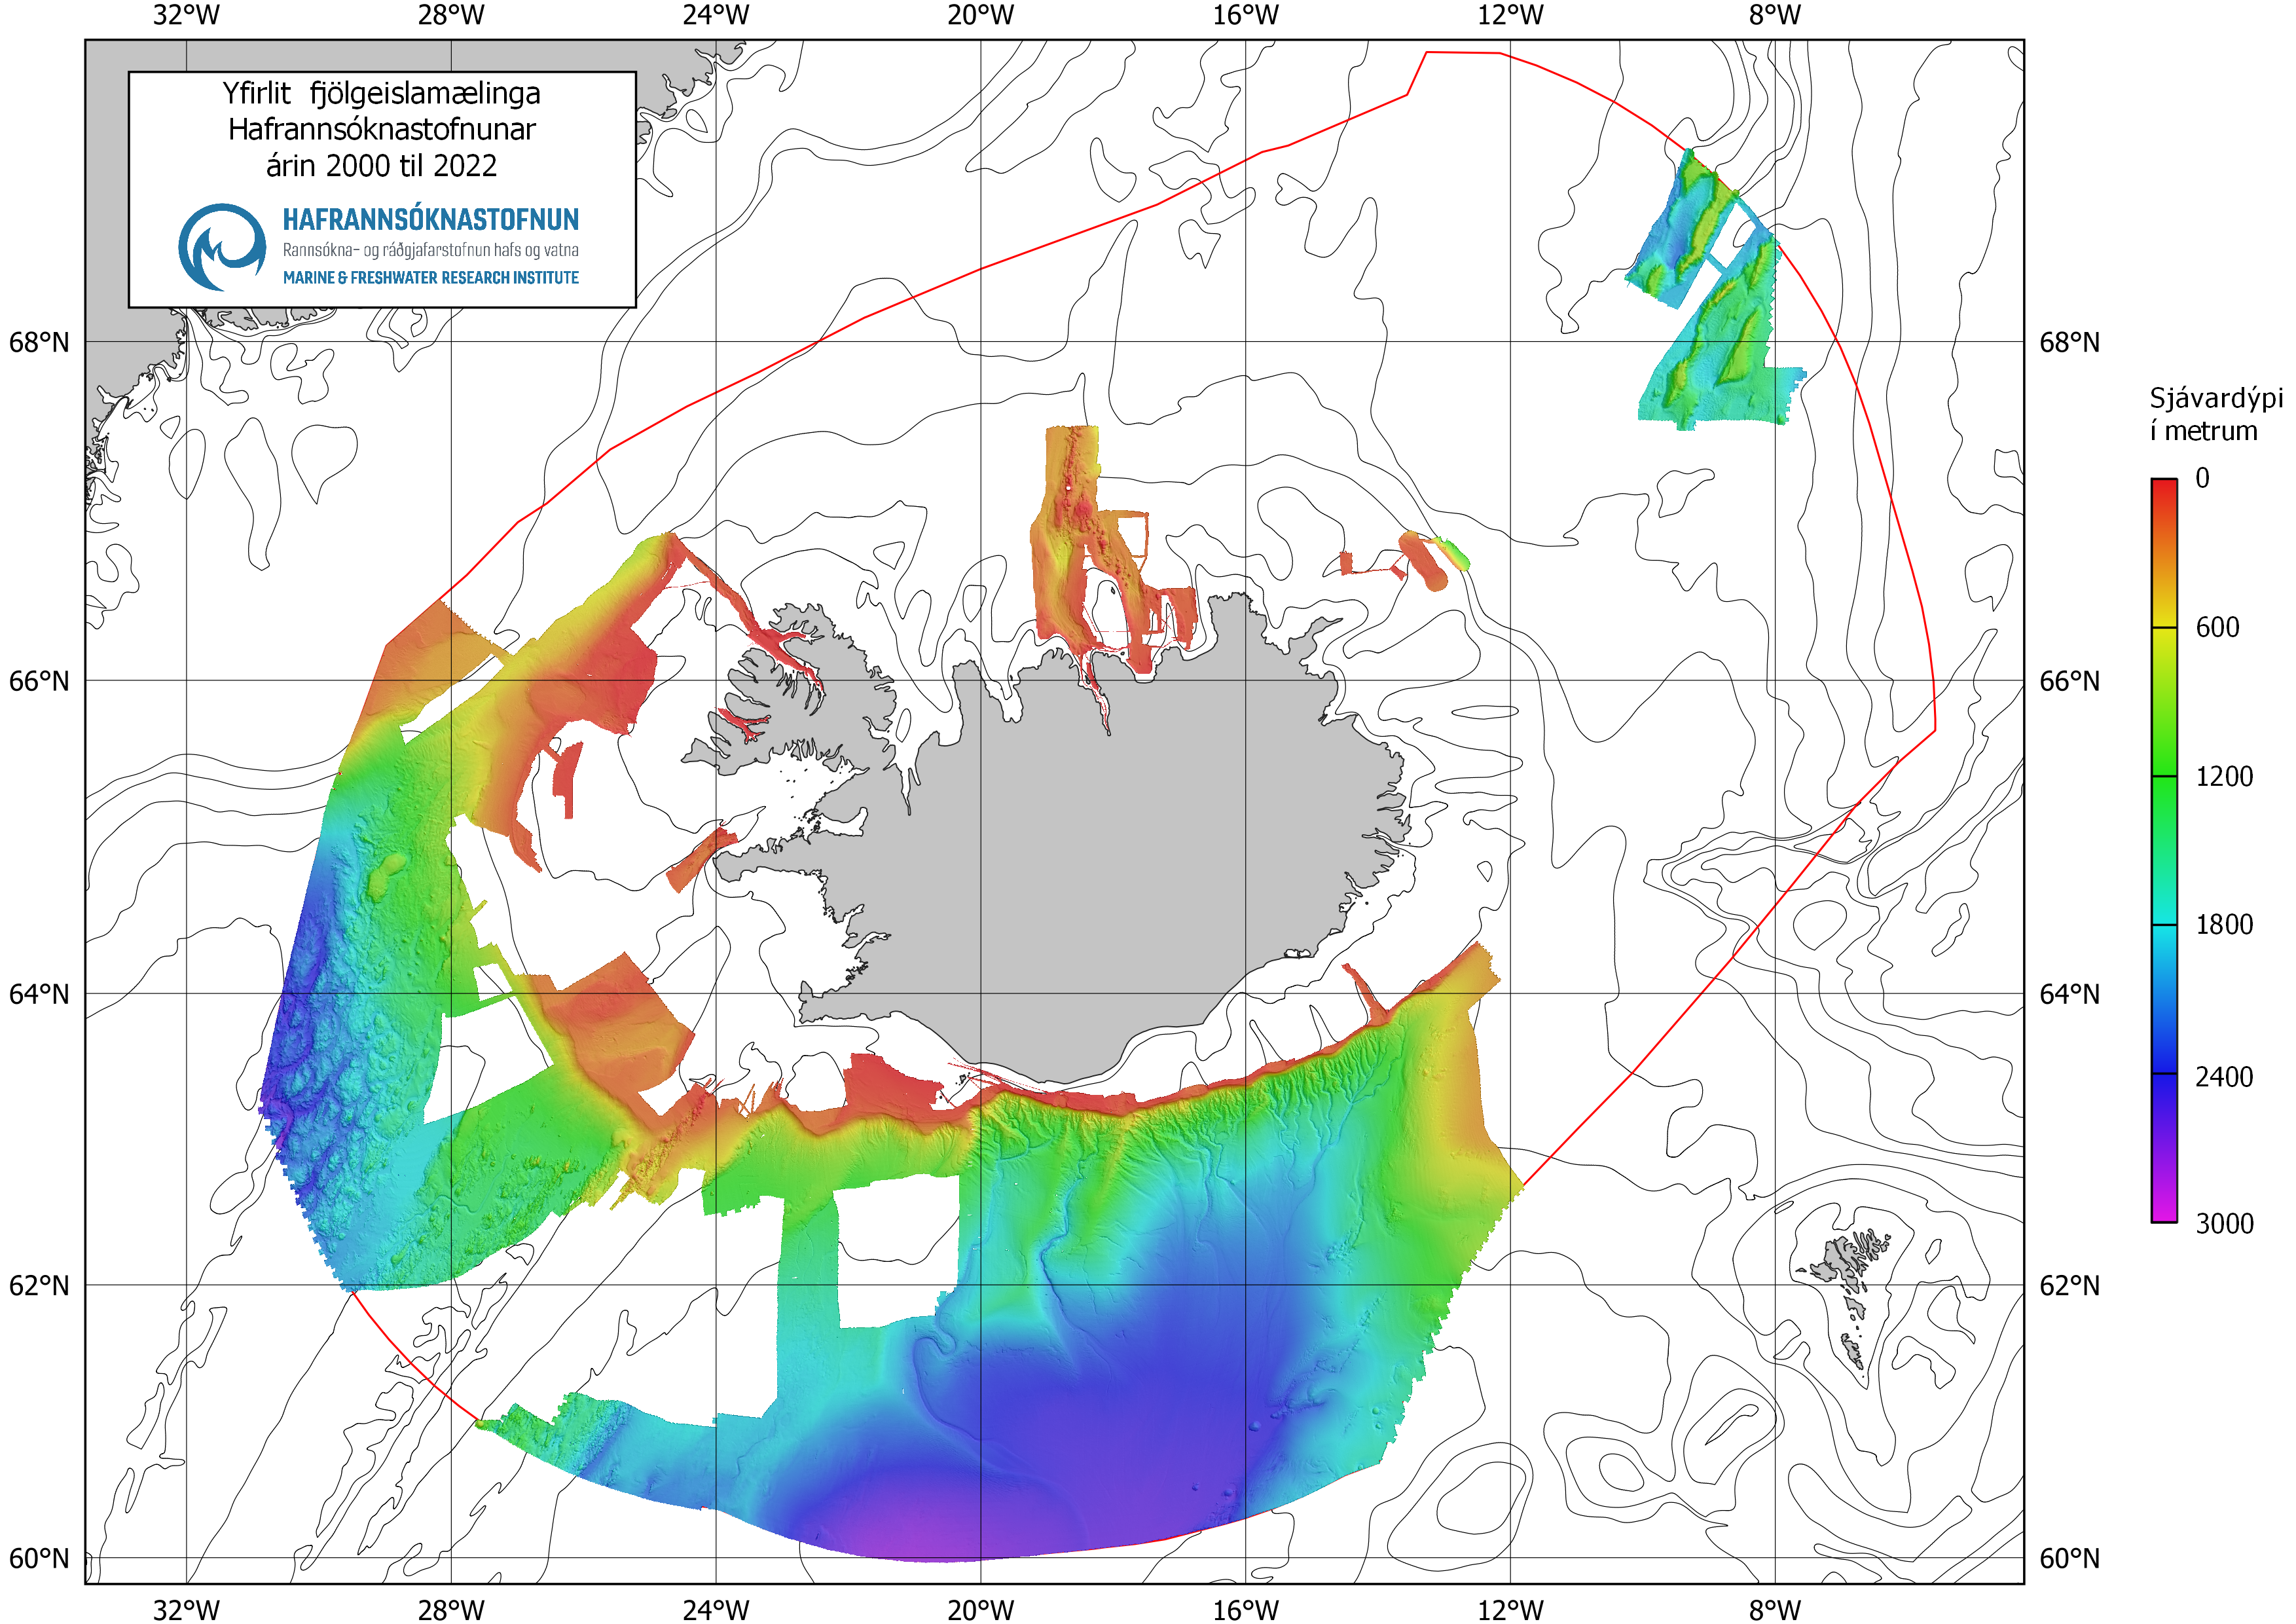 seabed mapping image